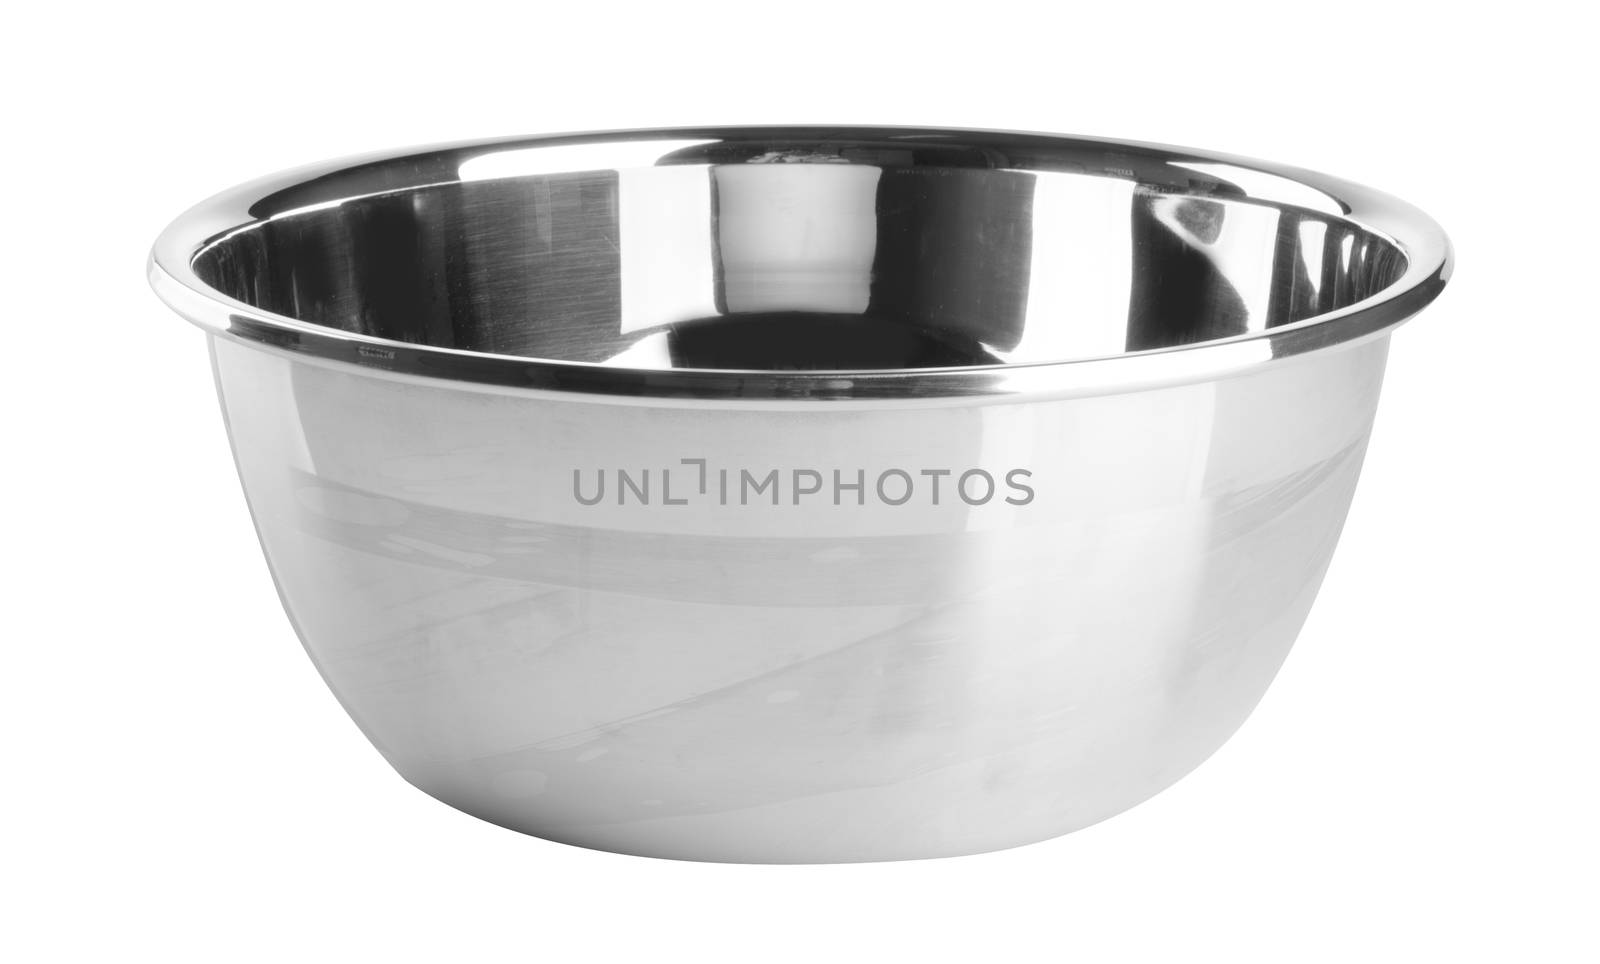 pot. stainless steel pot on background. stainless steel pot on a by heinteh